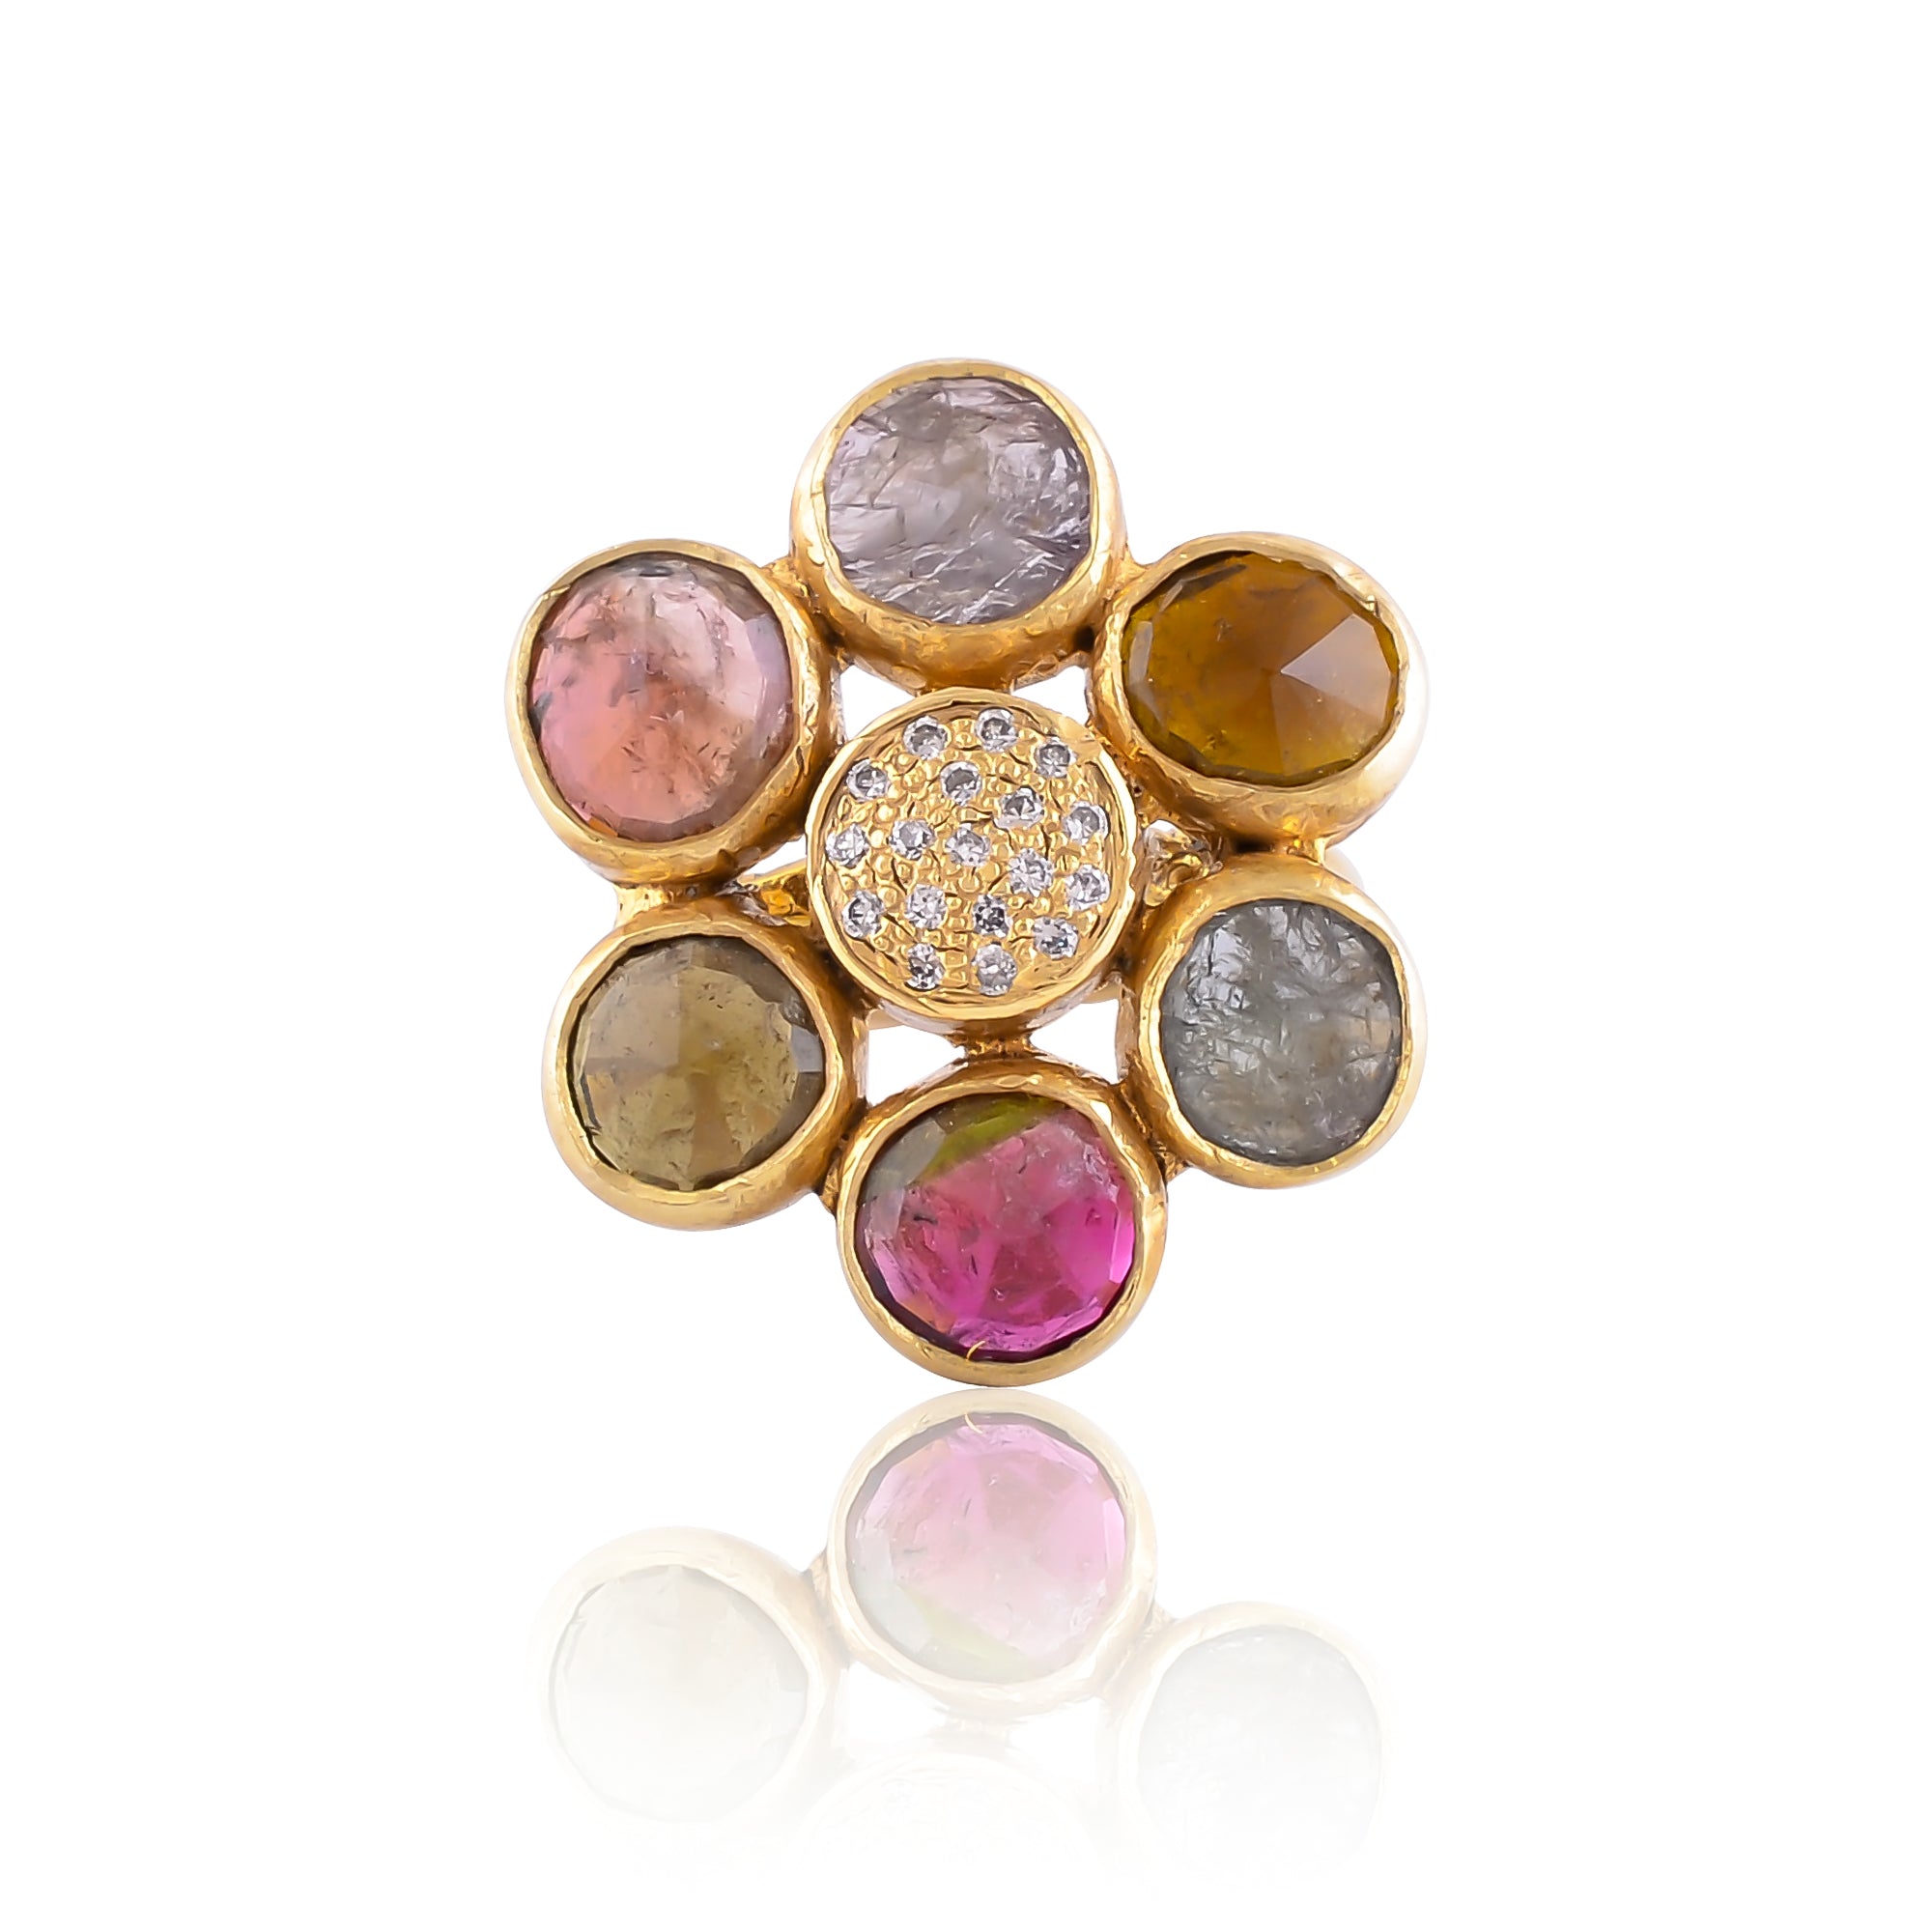 Buy Handcrafted Silver Gold Plated Multi Tourmaline / Zircon Ring